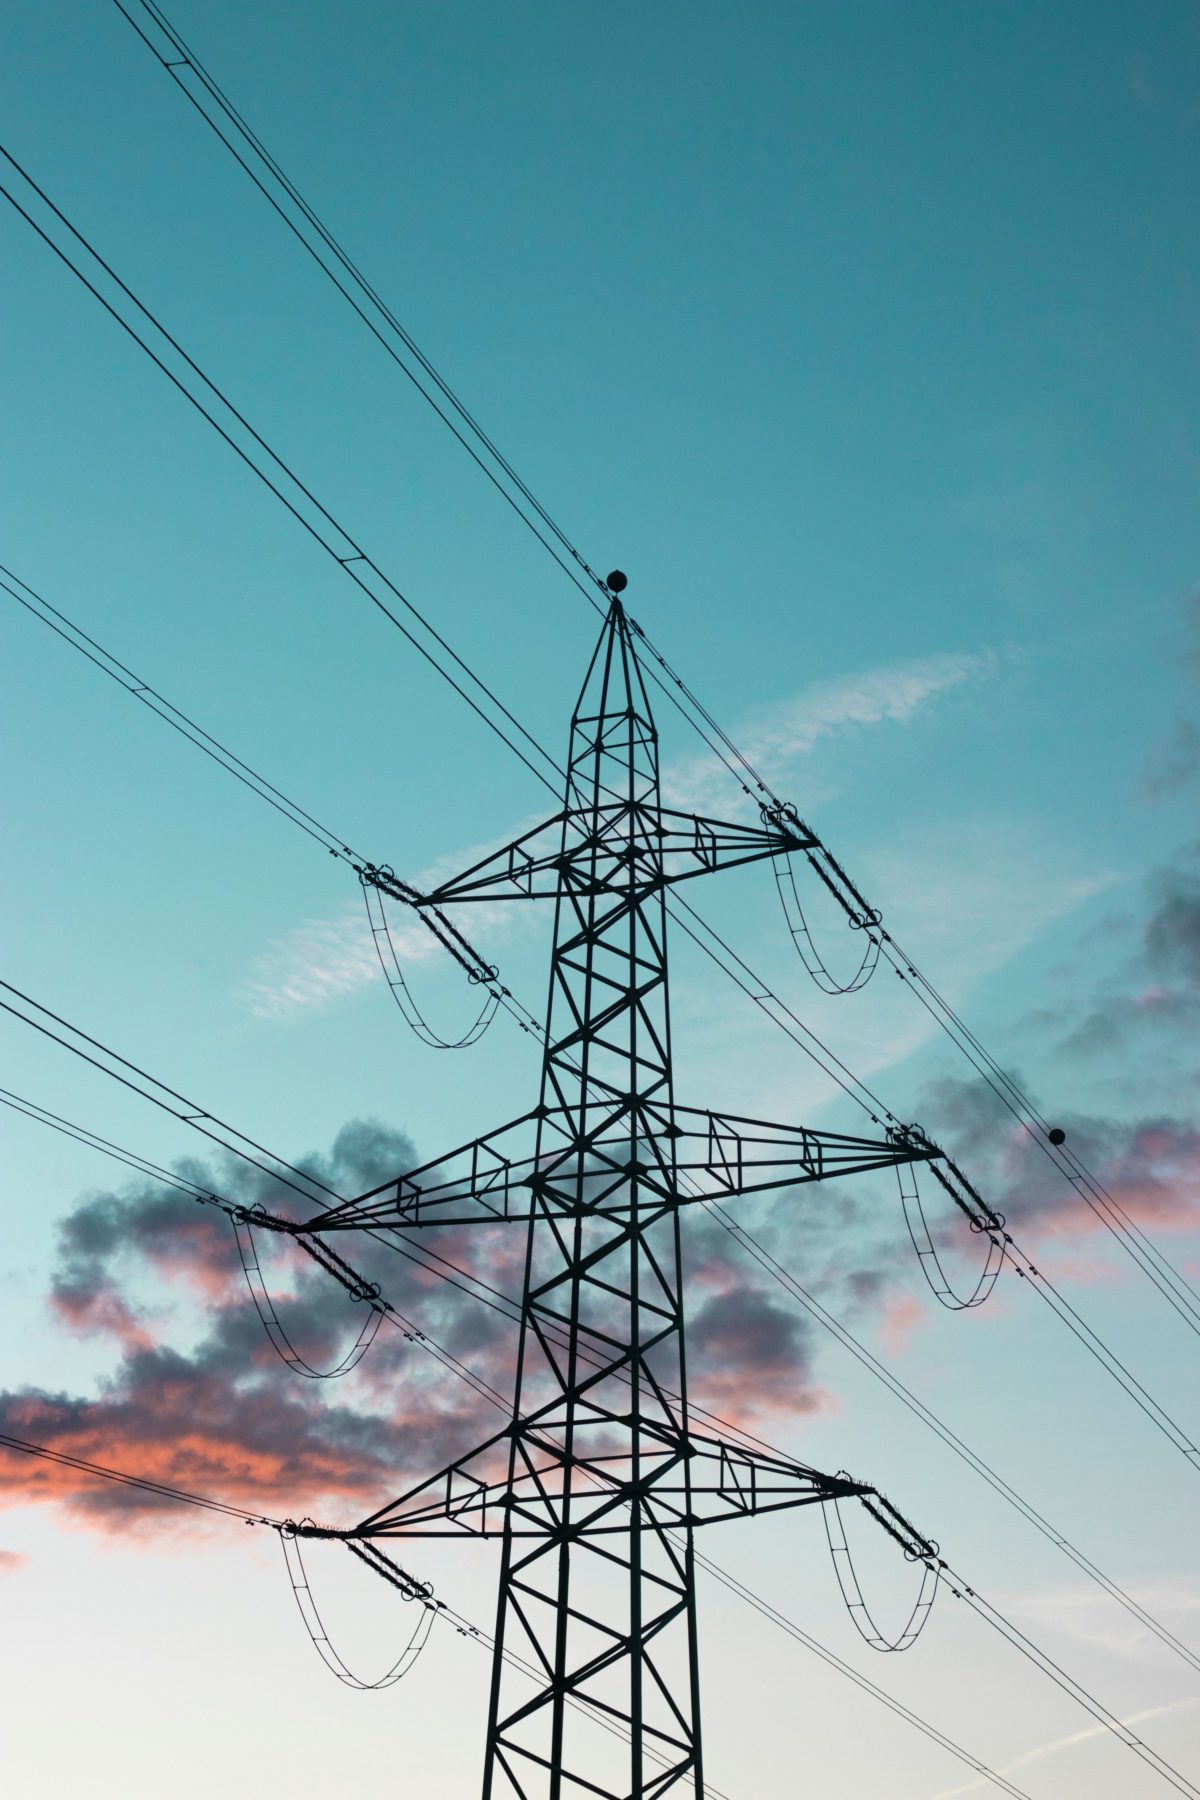 Electric Utilities are Having a Breakout Year